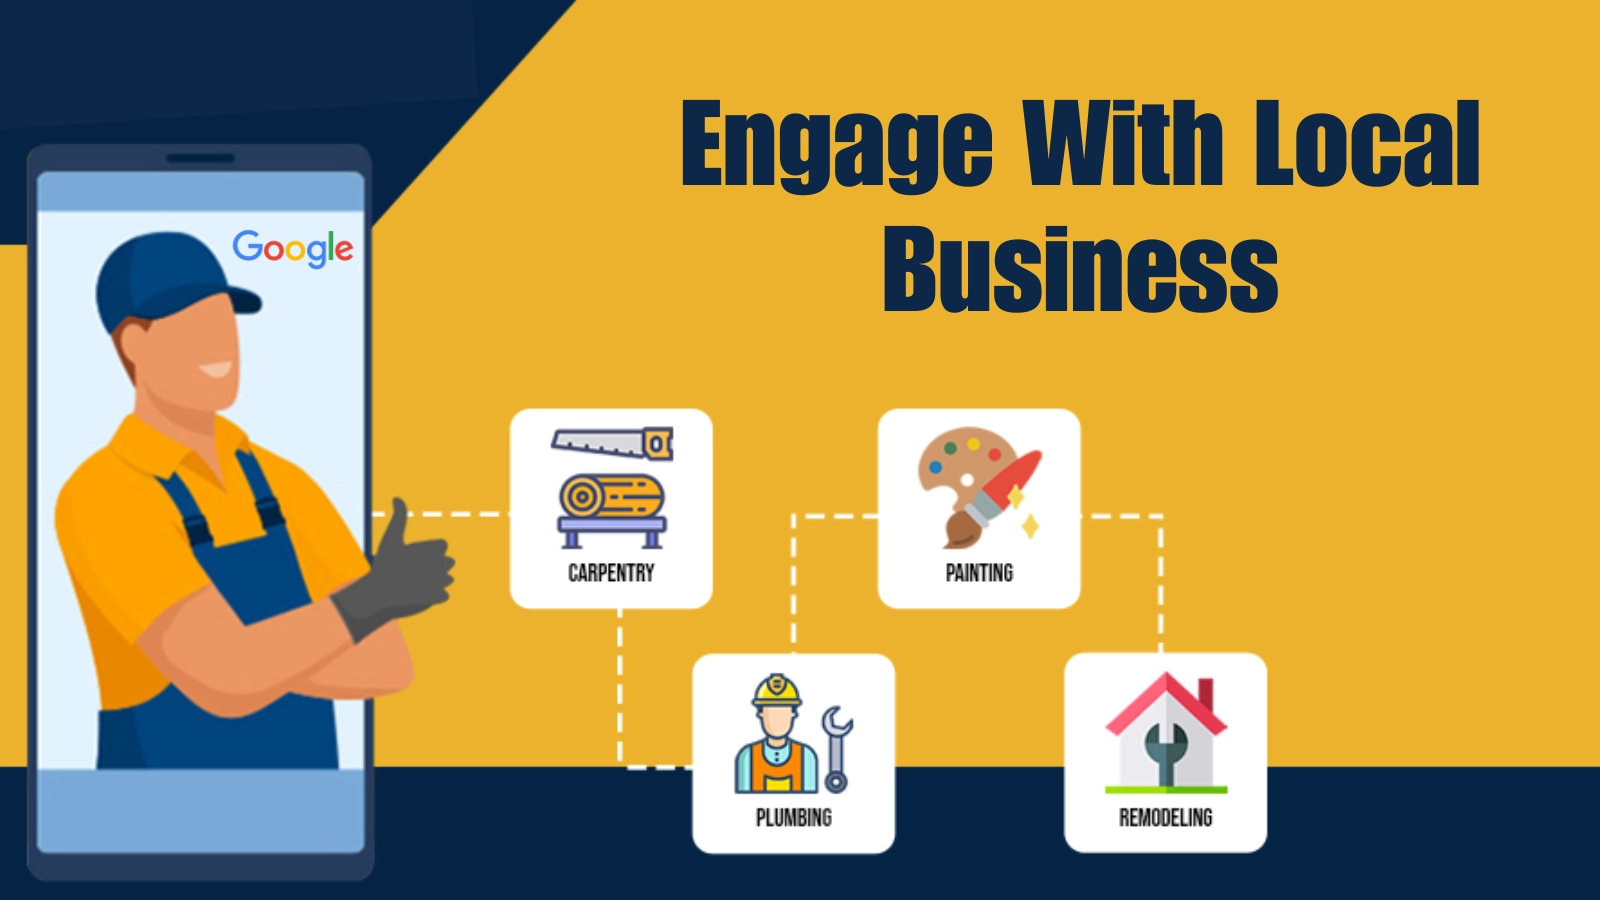 engagewith-local-business-for-handyman-ads